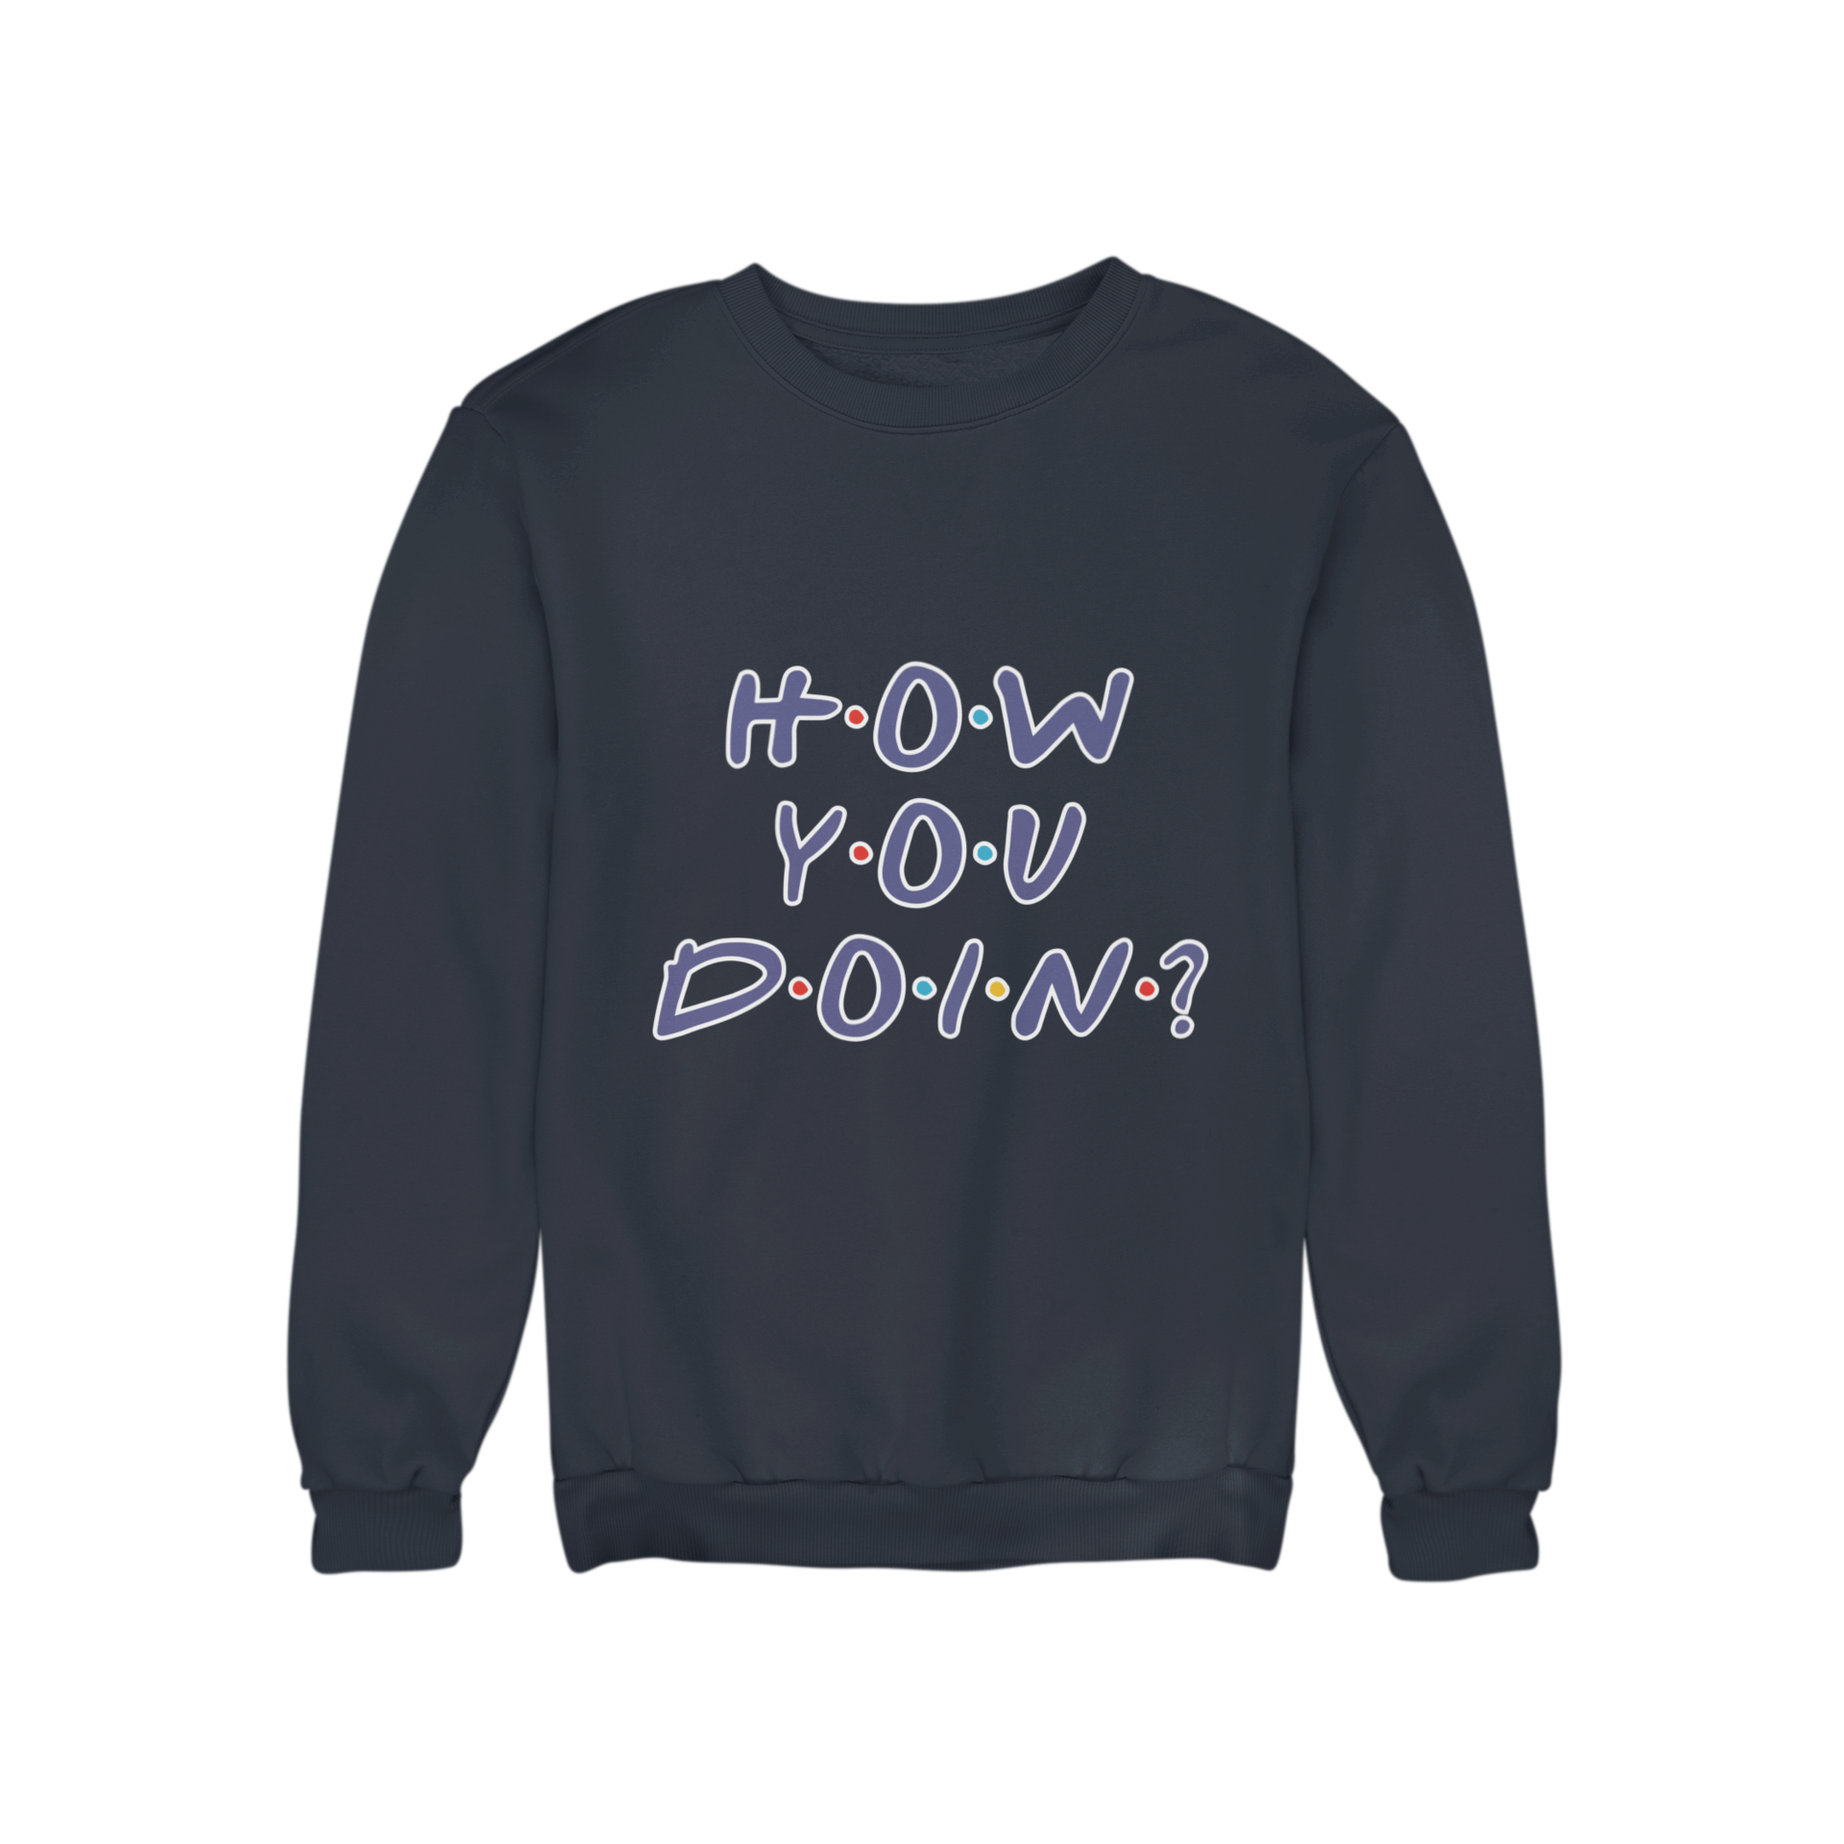 Get ready to channel your inner Joey Tribbiani with our "How you doin" sweatshirt from teevolution. This Friends-inspired slogan sweatshirt is the perfect way to stay cozy and stylish while paying homage to your favourite classic sitcom. Grab yours today and embrace the iconic catchphrase that never goes out of style.